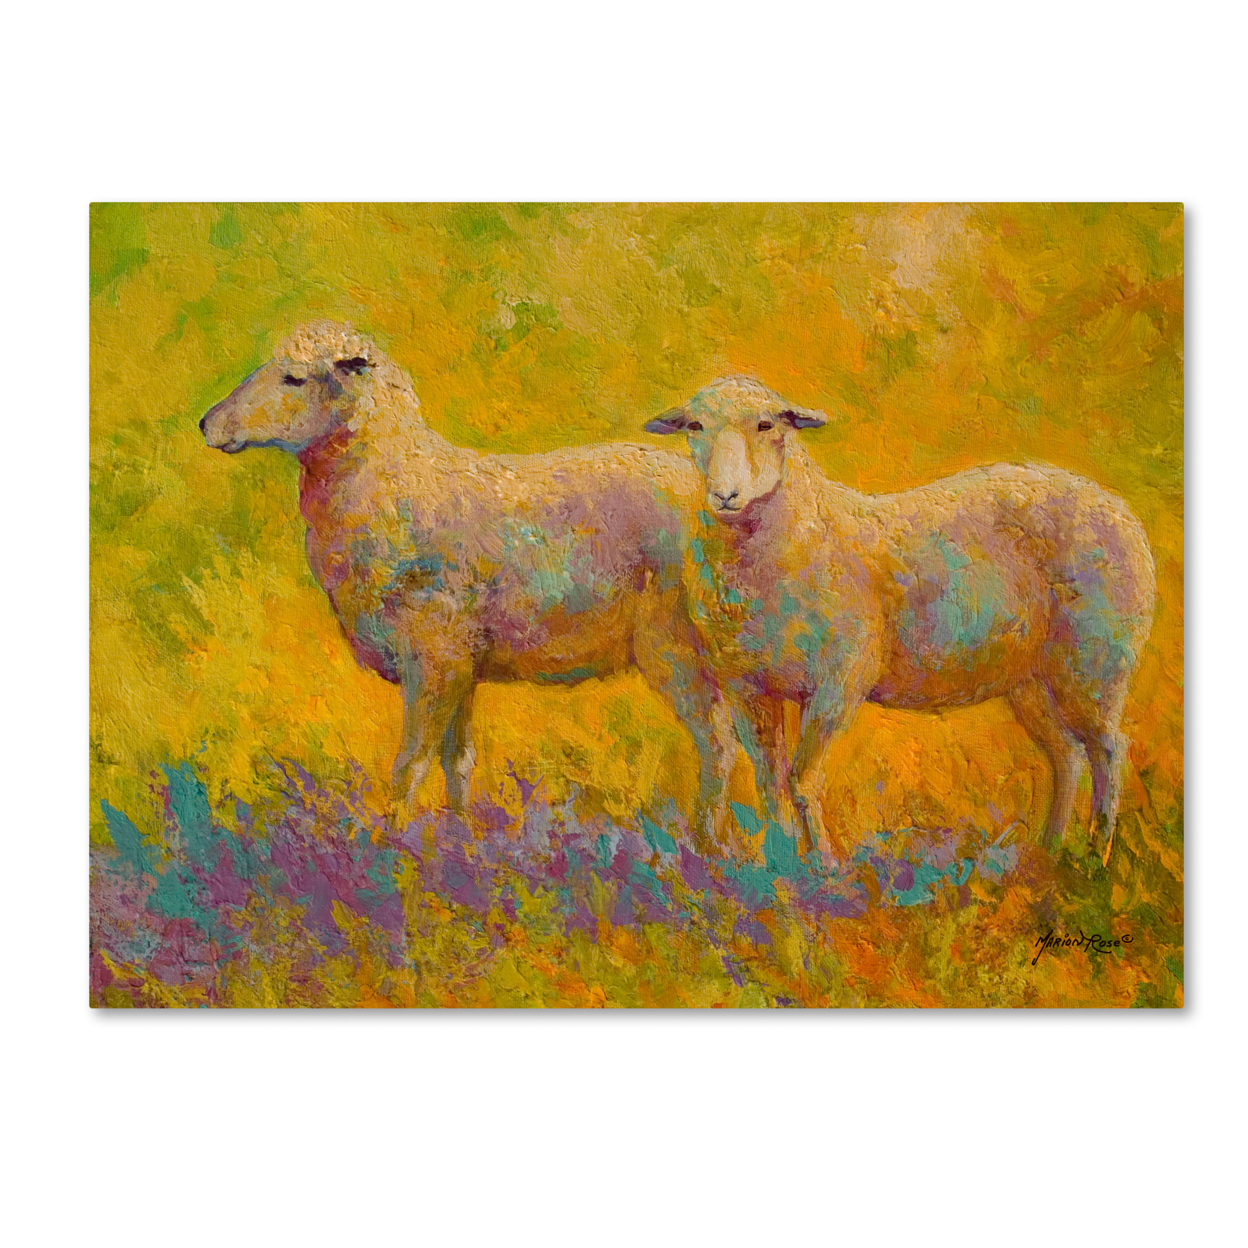 Marion Rose 'Warm Glow Sheep Pair' Ready To Hang Canvas Art 18 X 24 Inches Made In USA